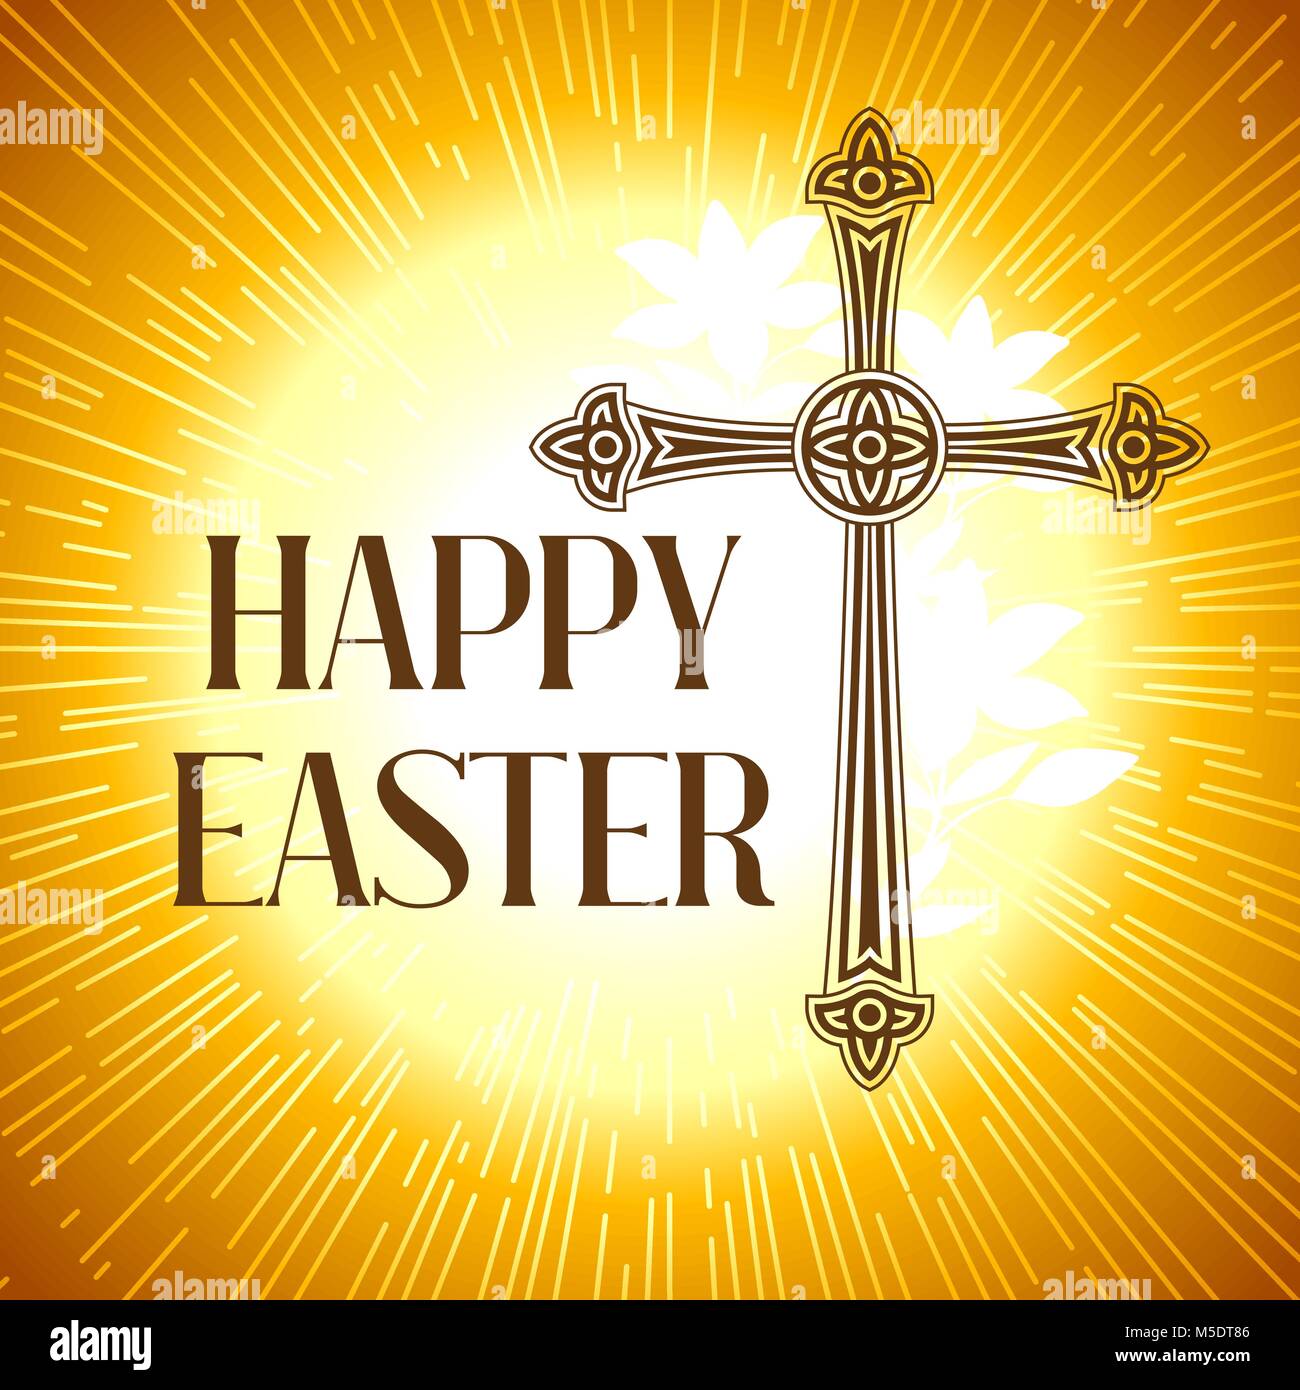 Silhouette of ornate cross. Happy Easter concept illustration or ...